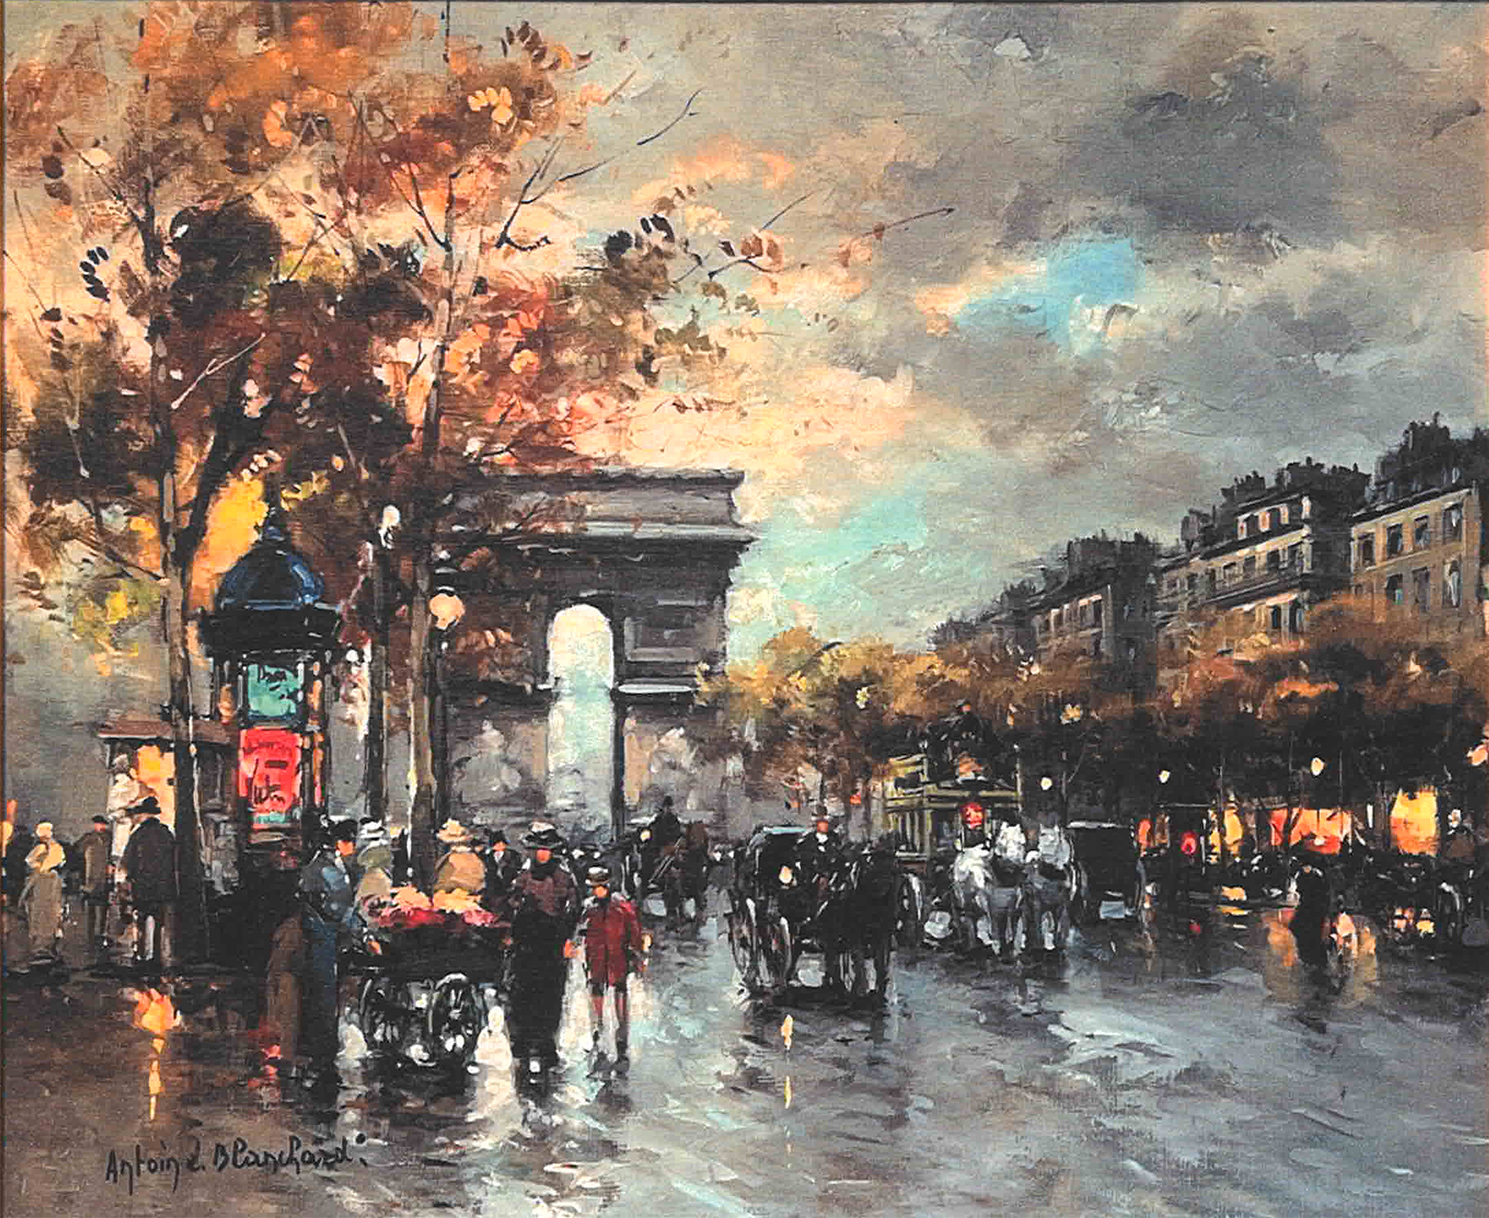 painting of the arc de triomphe wth people, horses and flower cart on the champs elysses